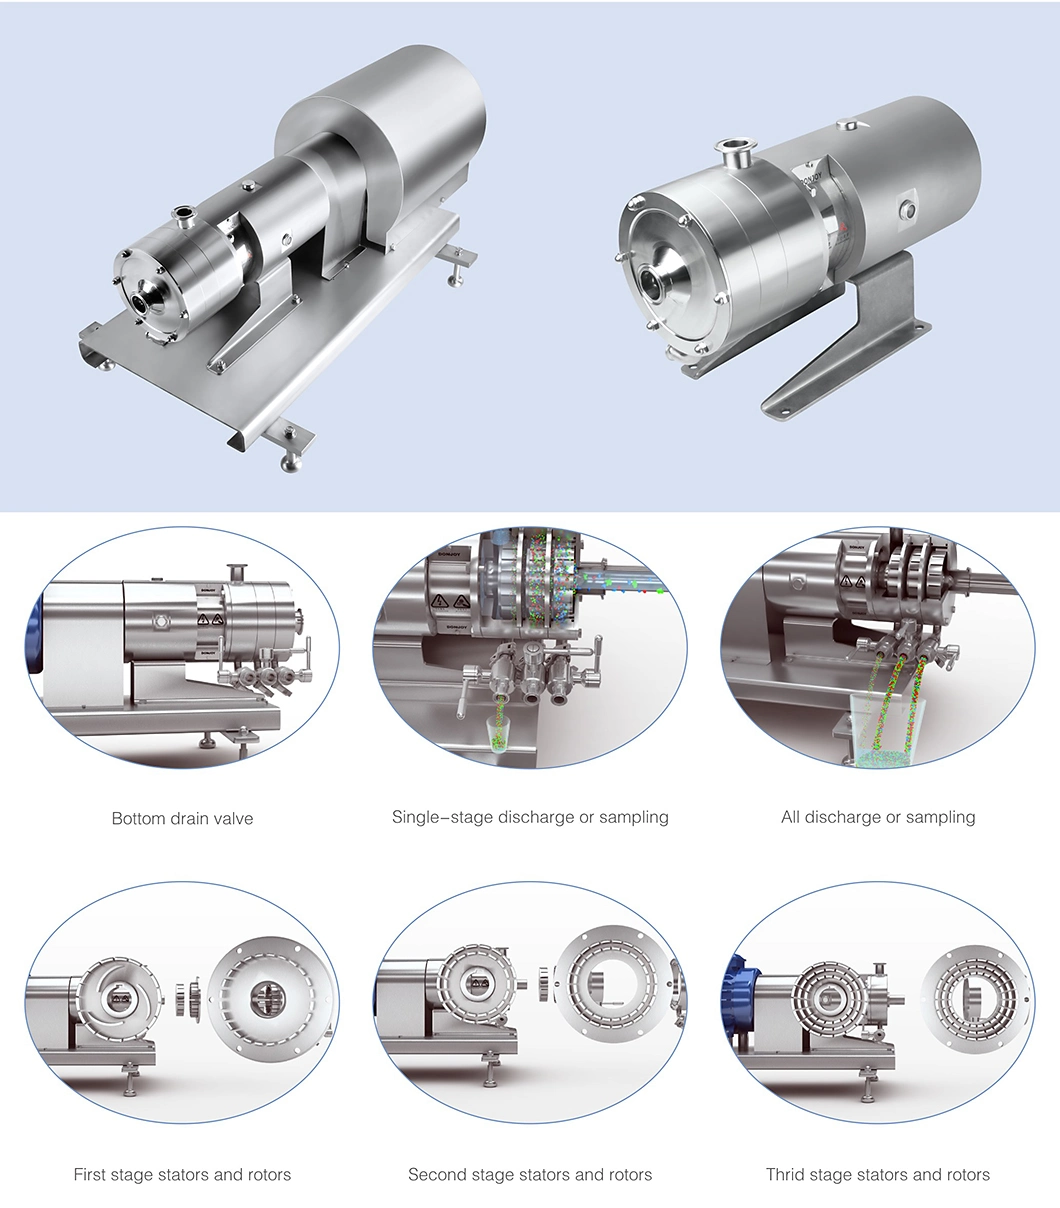 3A Sanitary Single-Stage Emulsified Homogeneous Mixing Pump for Dairy Processing